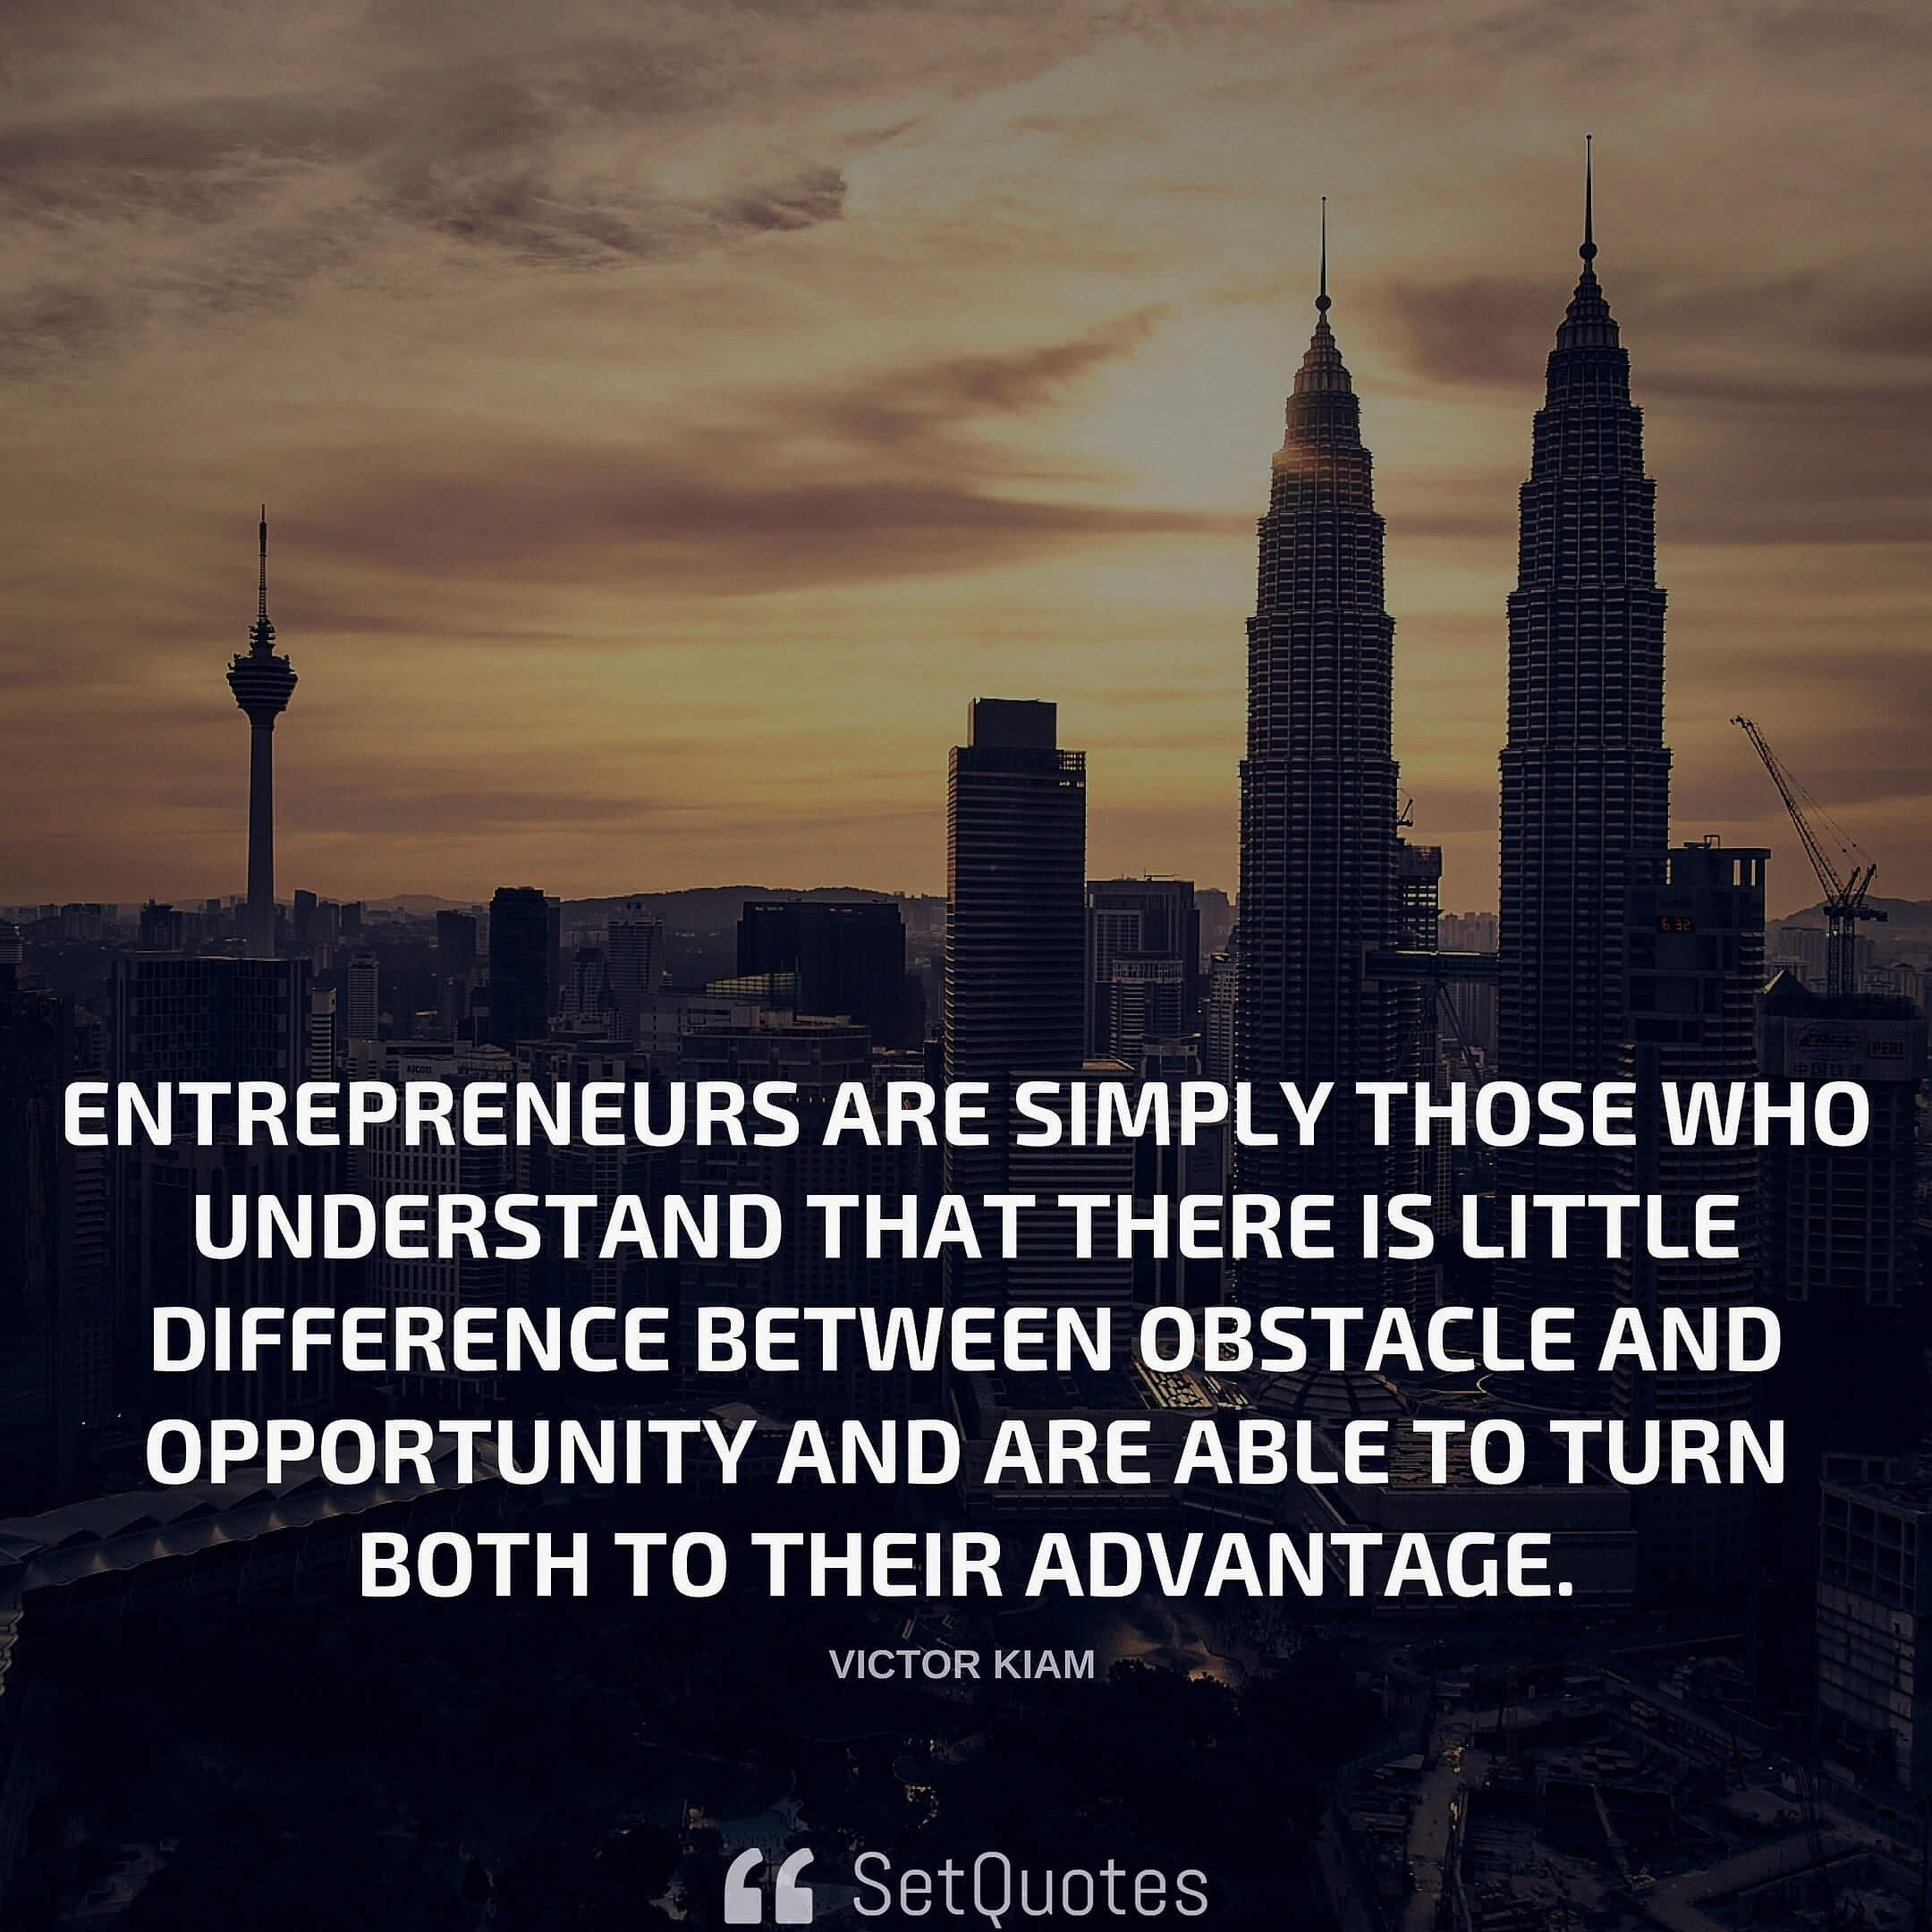 Entrepreneurs Are Simply Those Who Understand That There Is Little Difference Between Obstacle And Opportunity And Are Able To Turn Both To Their Advantage.